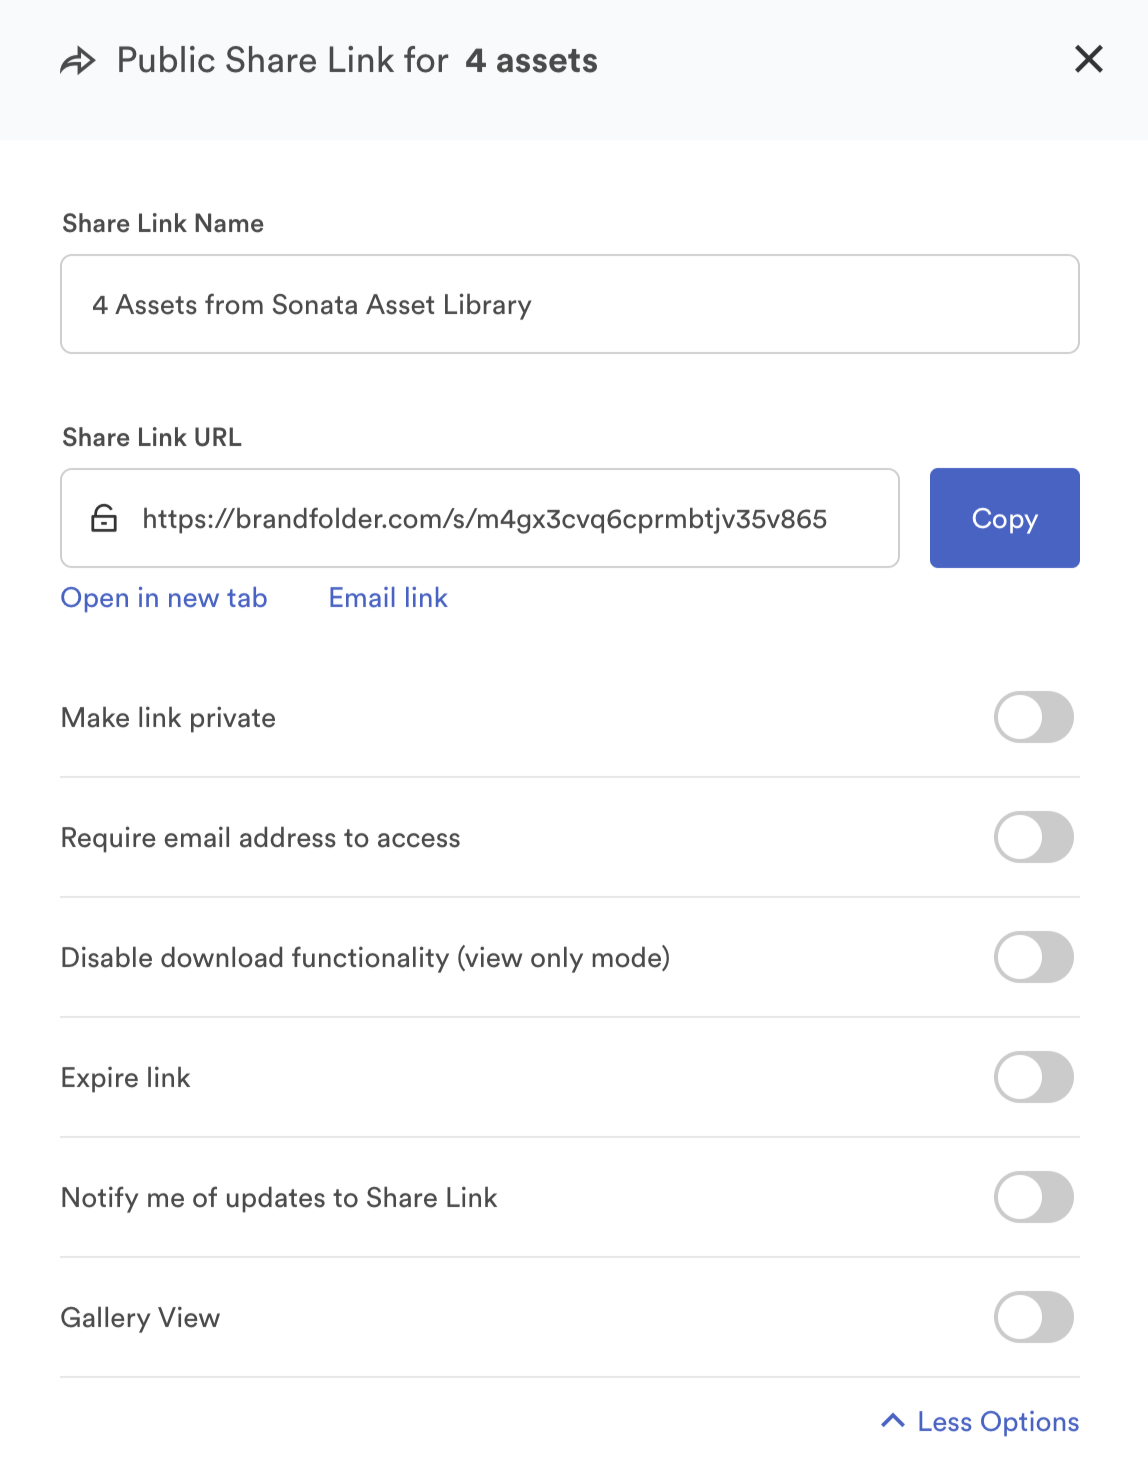 Share link modal with options to make link private, require email address to access, disable download functionality, expire link, notify me of updates to Share Link, and Gallery View